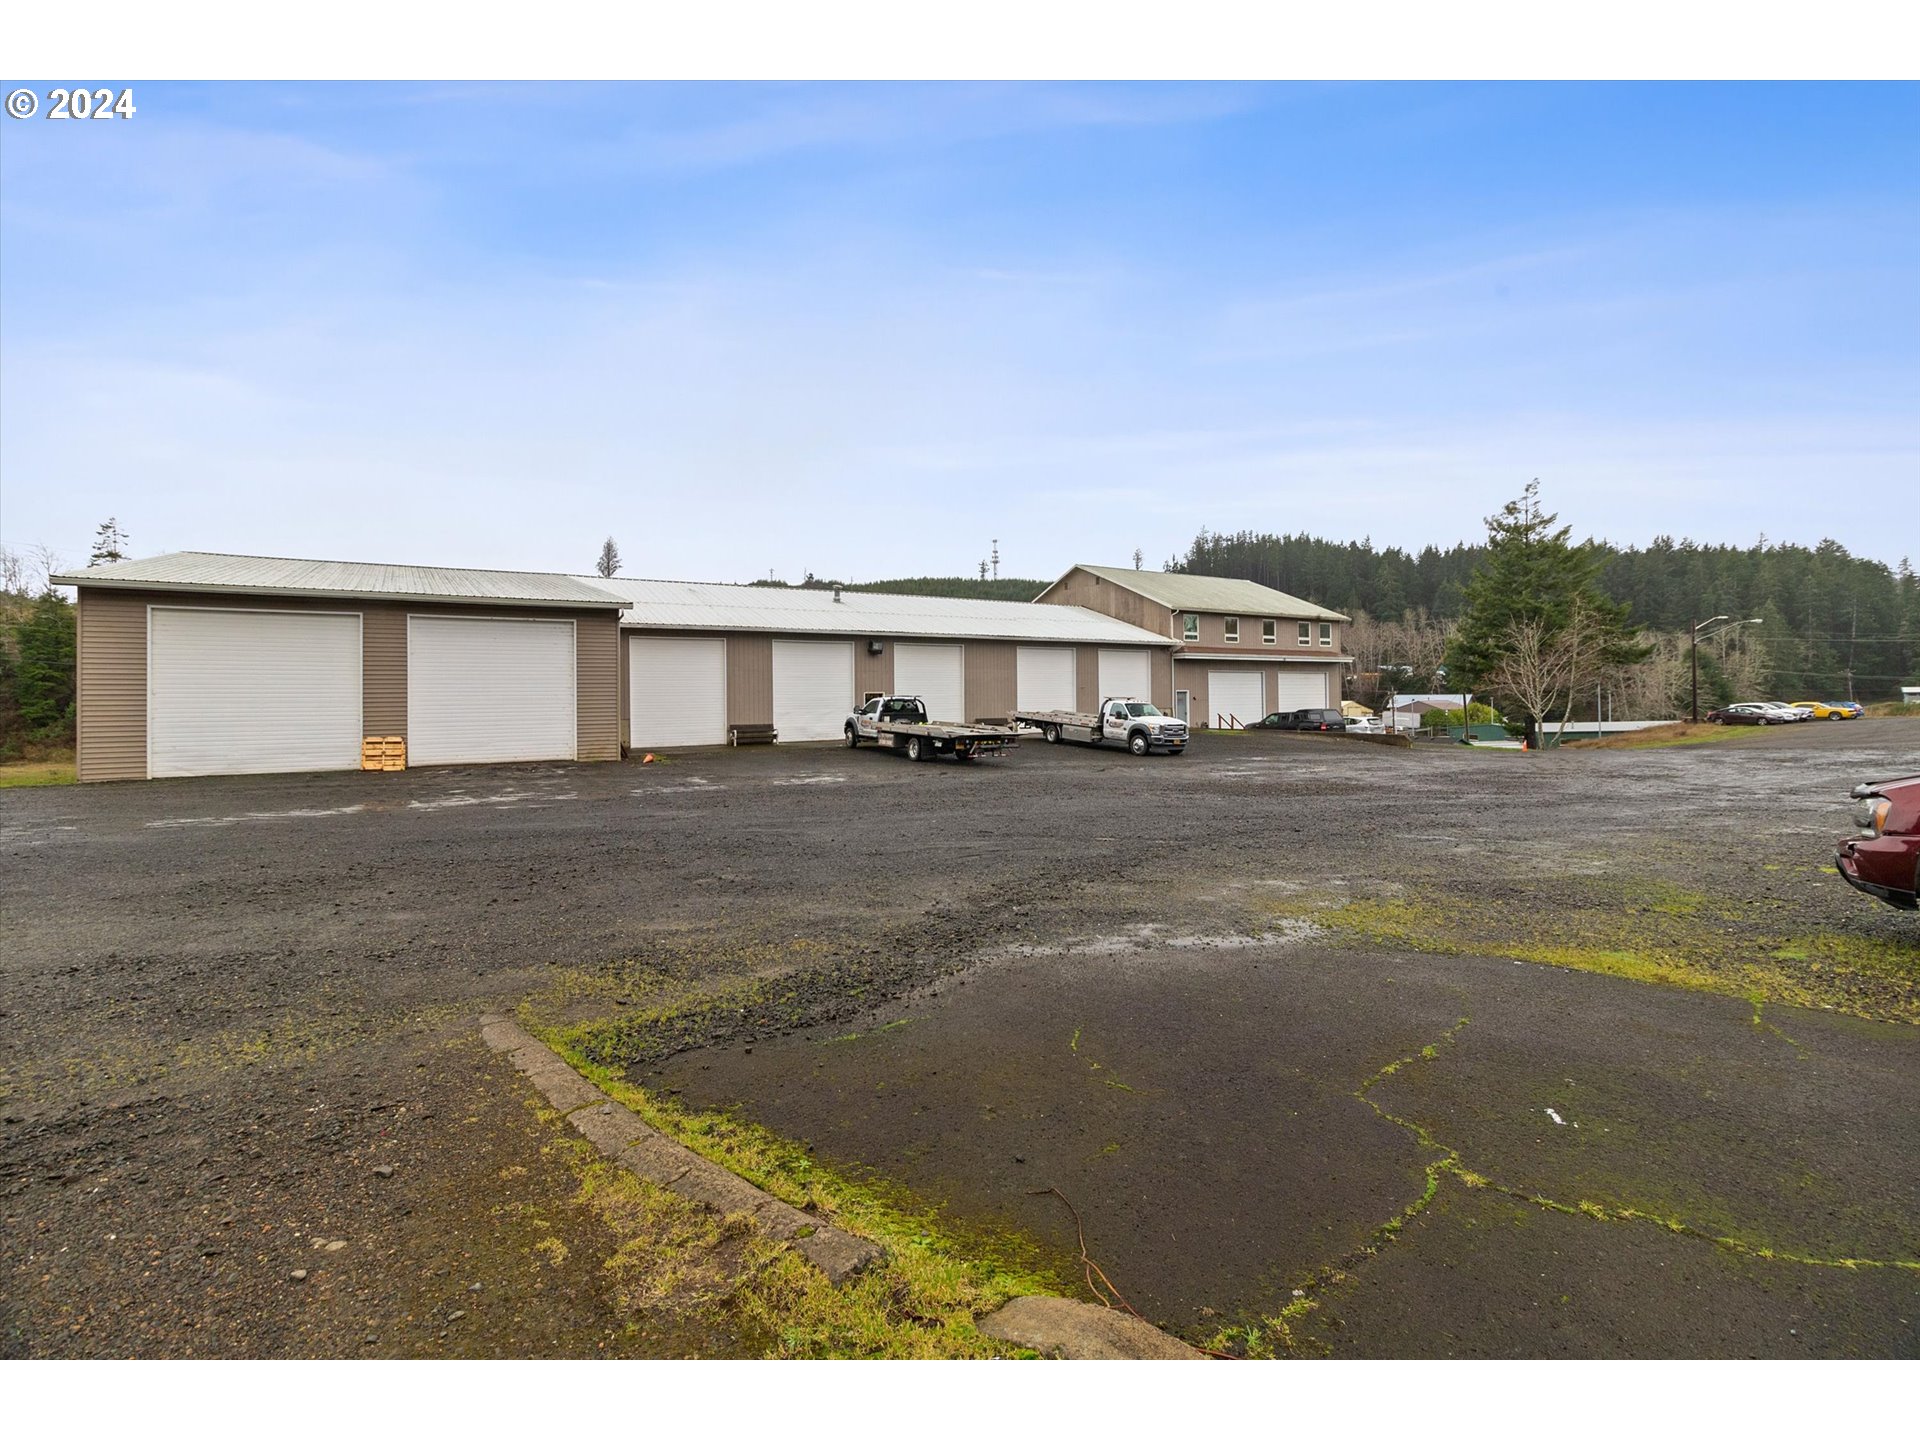 2795 SE 23RD DR, Lincoln City, OR 97367